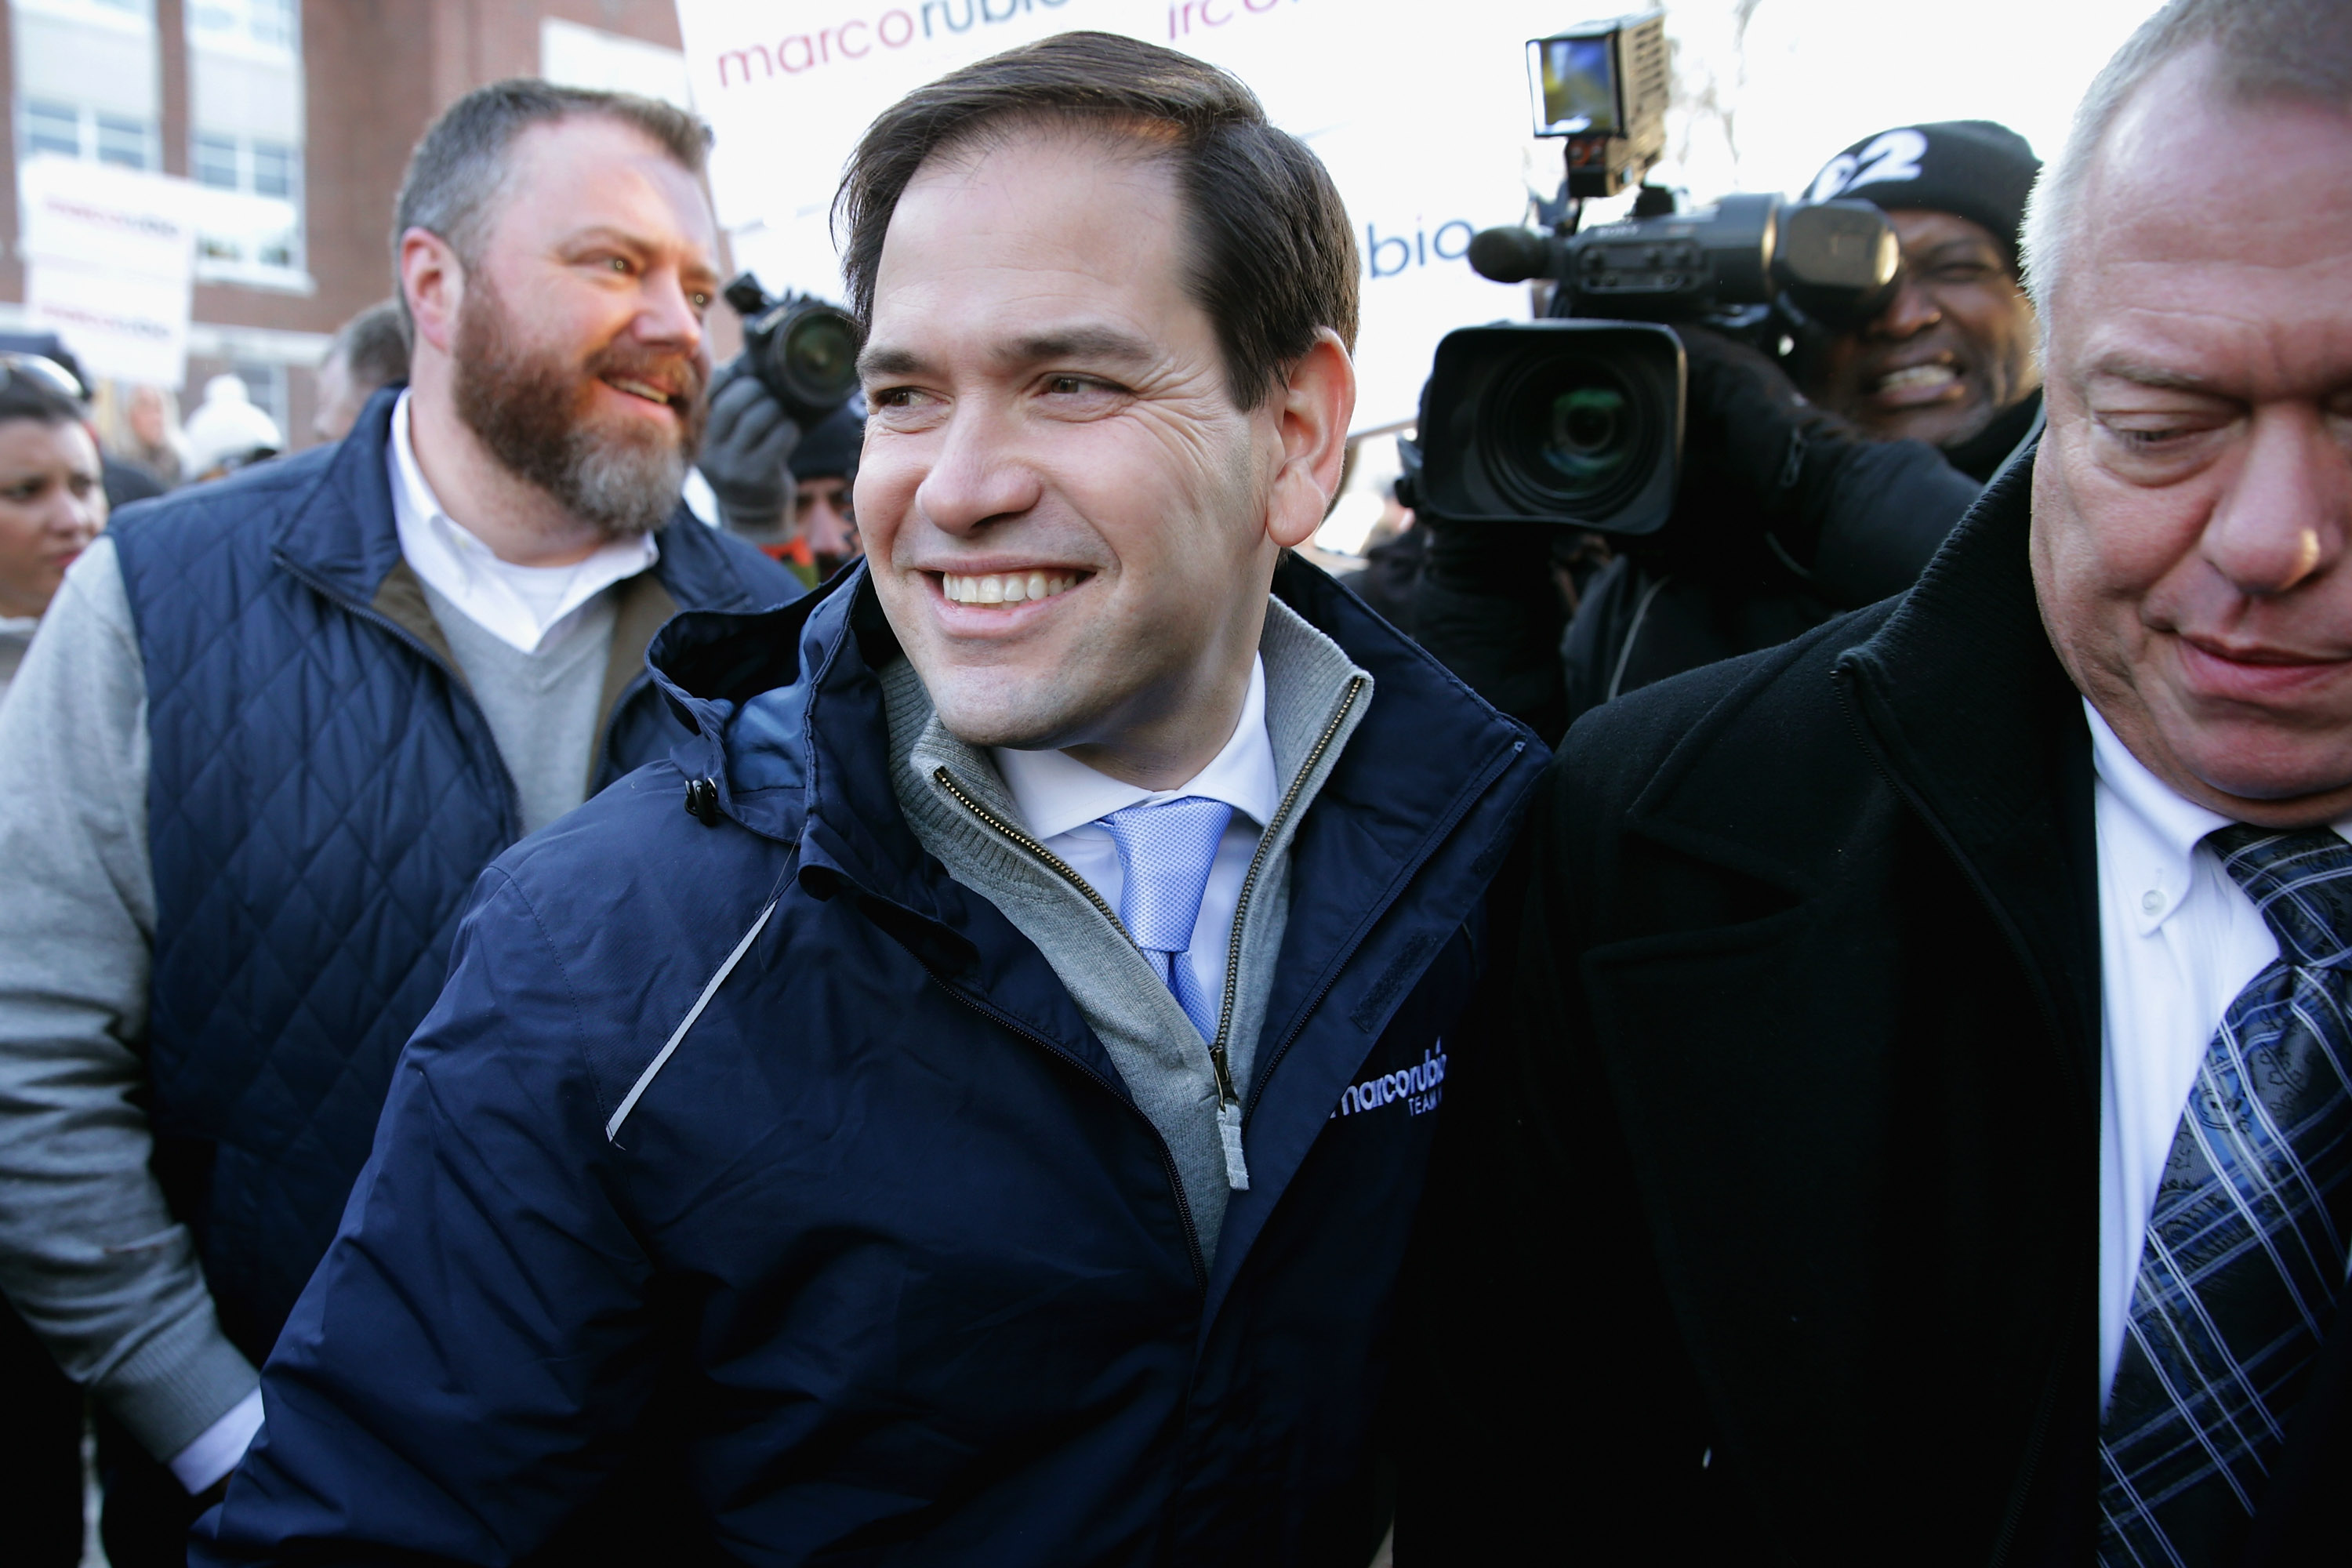 The Marco Rubio Effect on Your Wallet